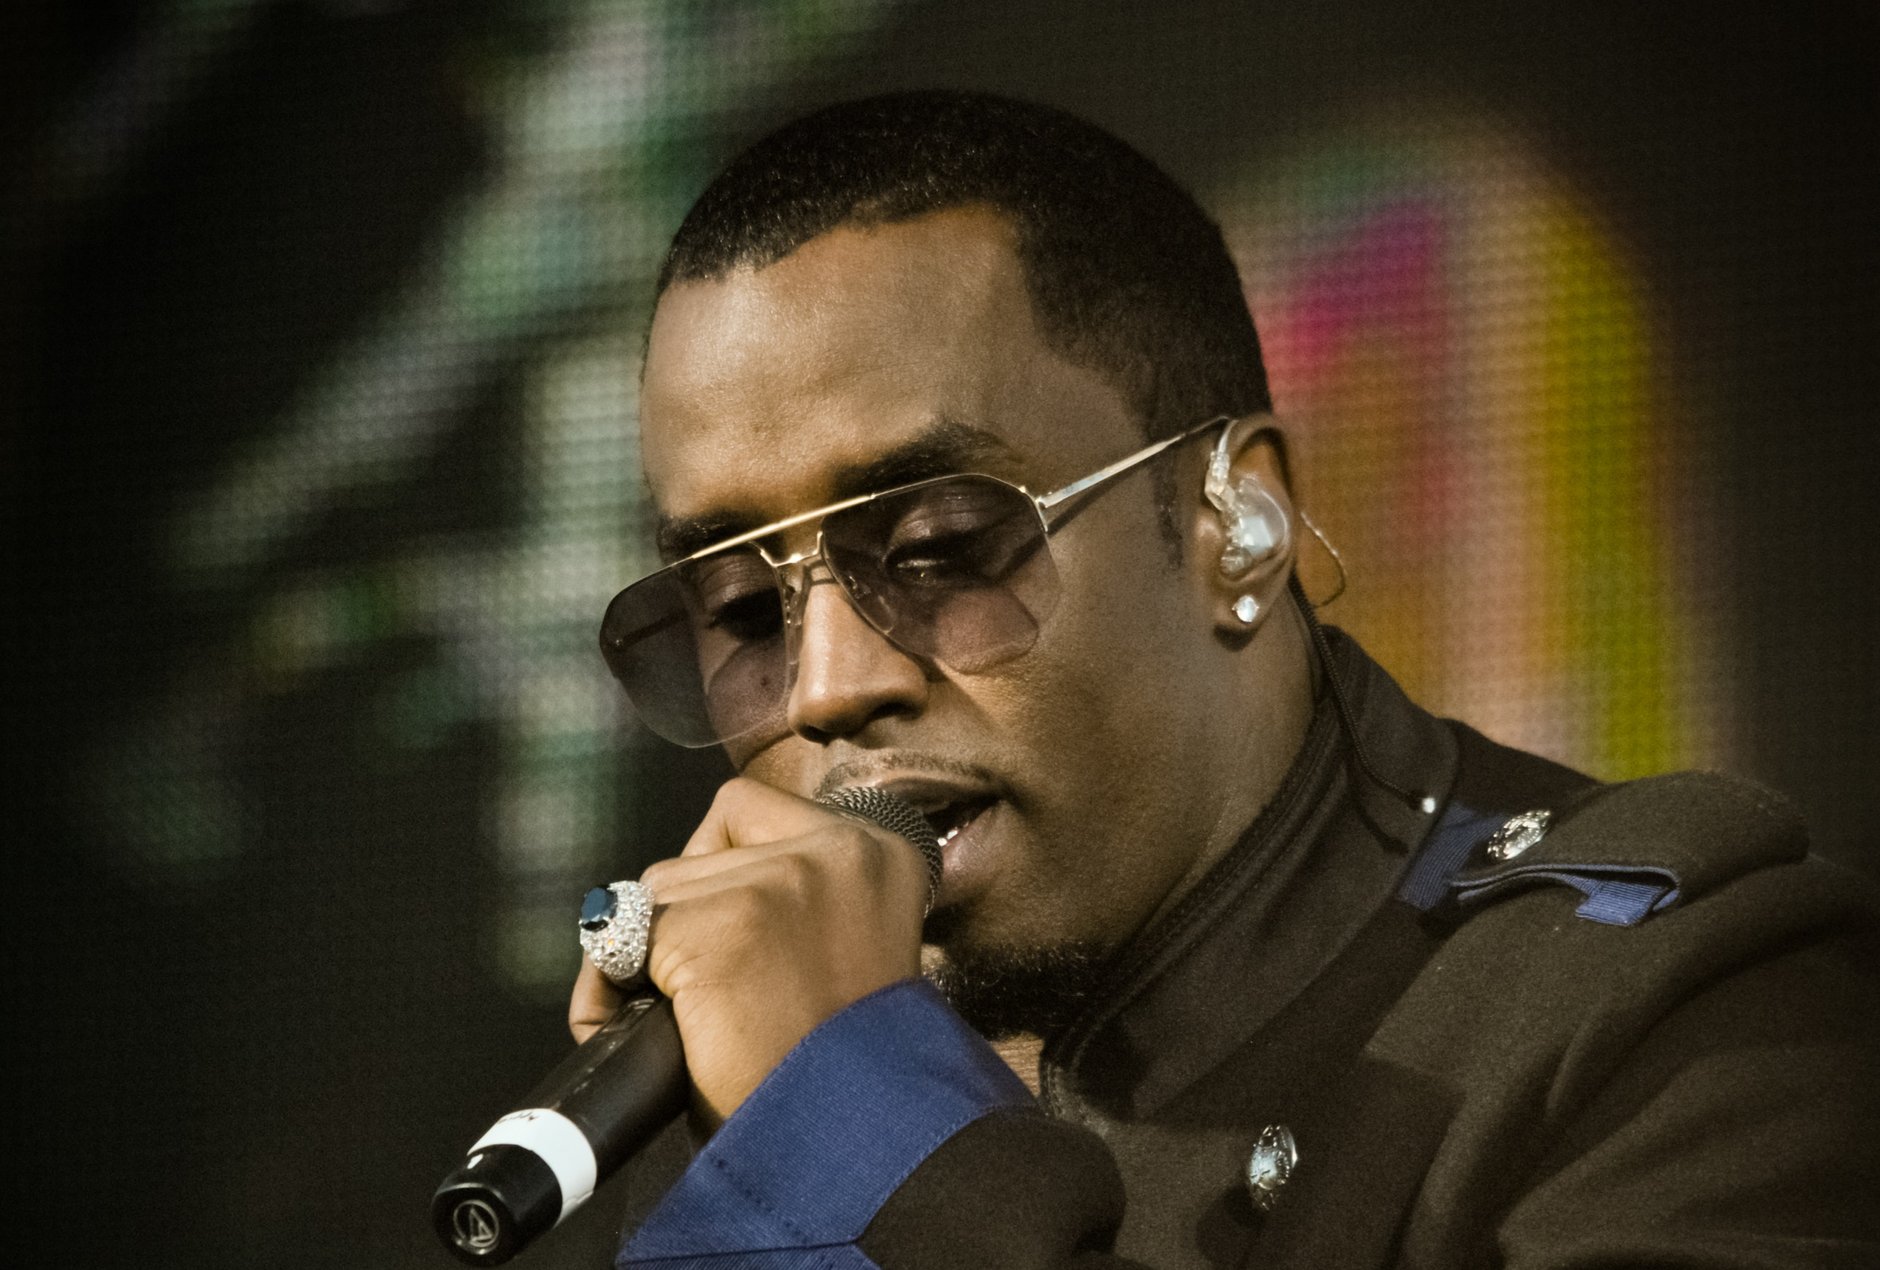 Sean 'Diddy' Combs accused of rape and battery by ex, singer Cassie |  Courthouse News Service